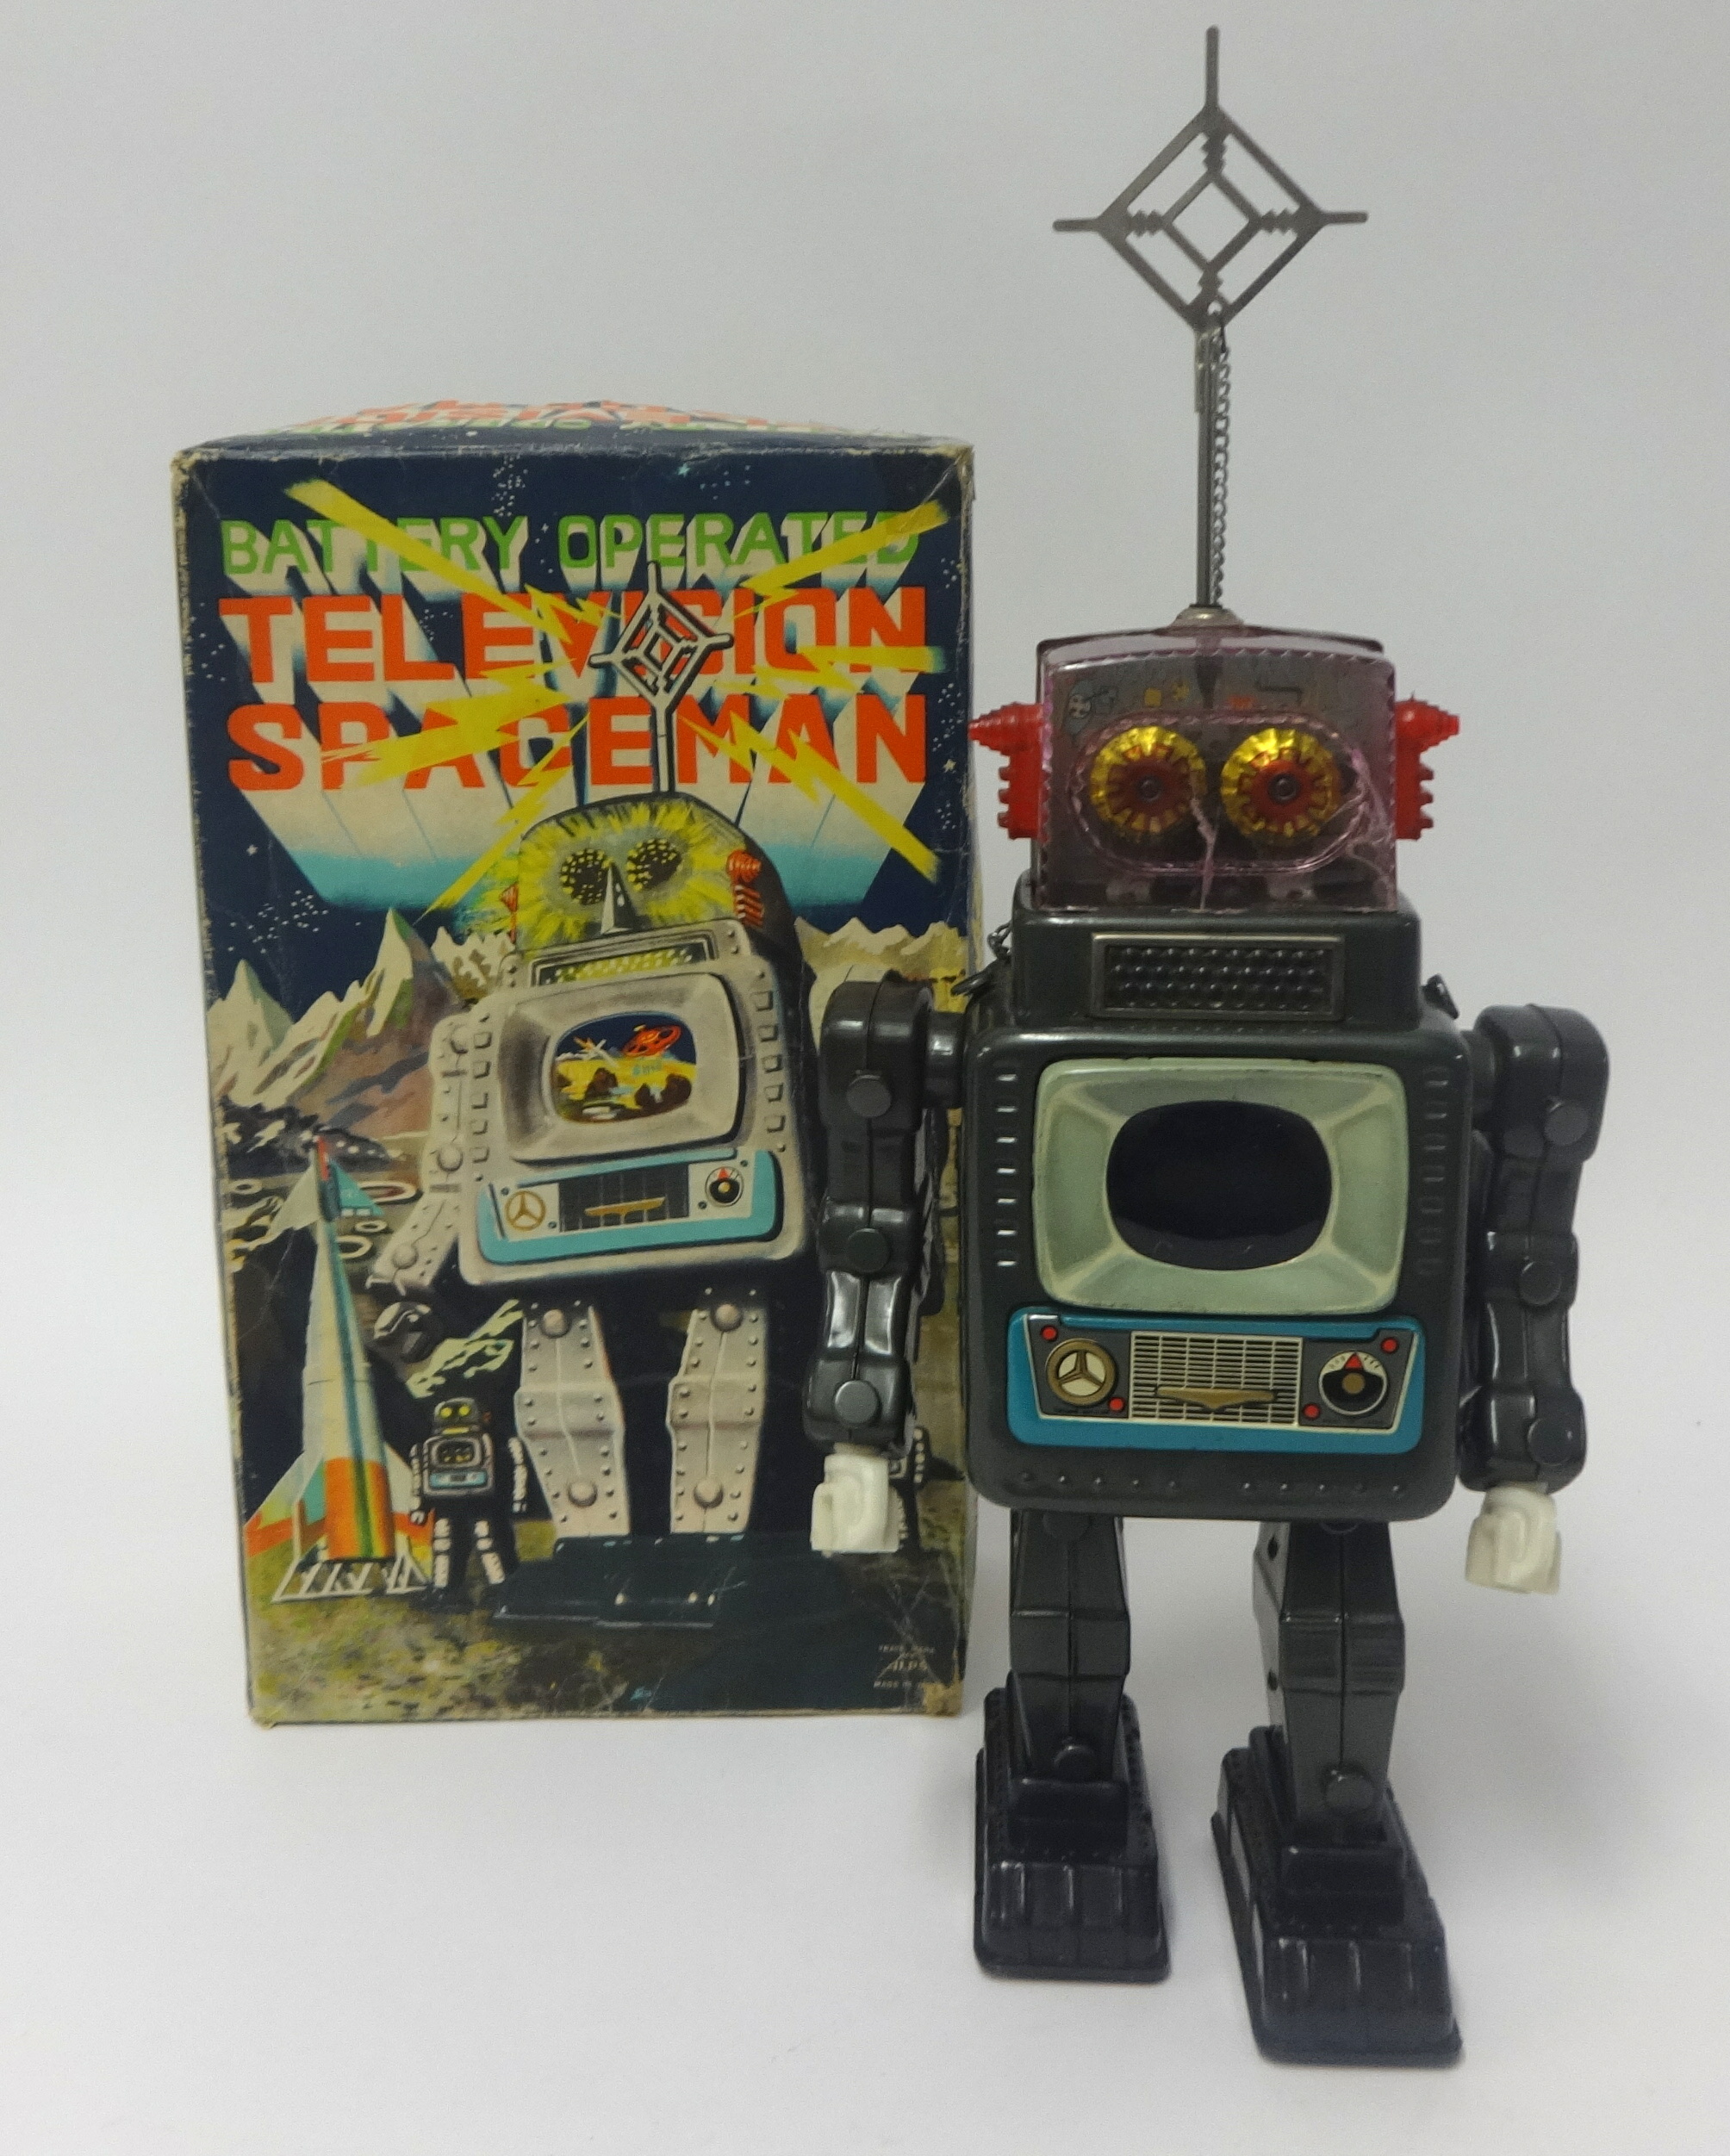 An ALPS Japanese battery operated tinplate Television Spaceman Robot in original box, 38cm high. - Image 2 of 2